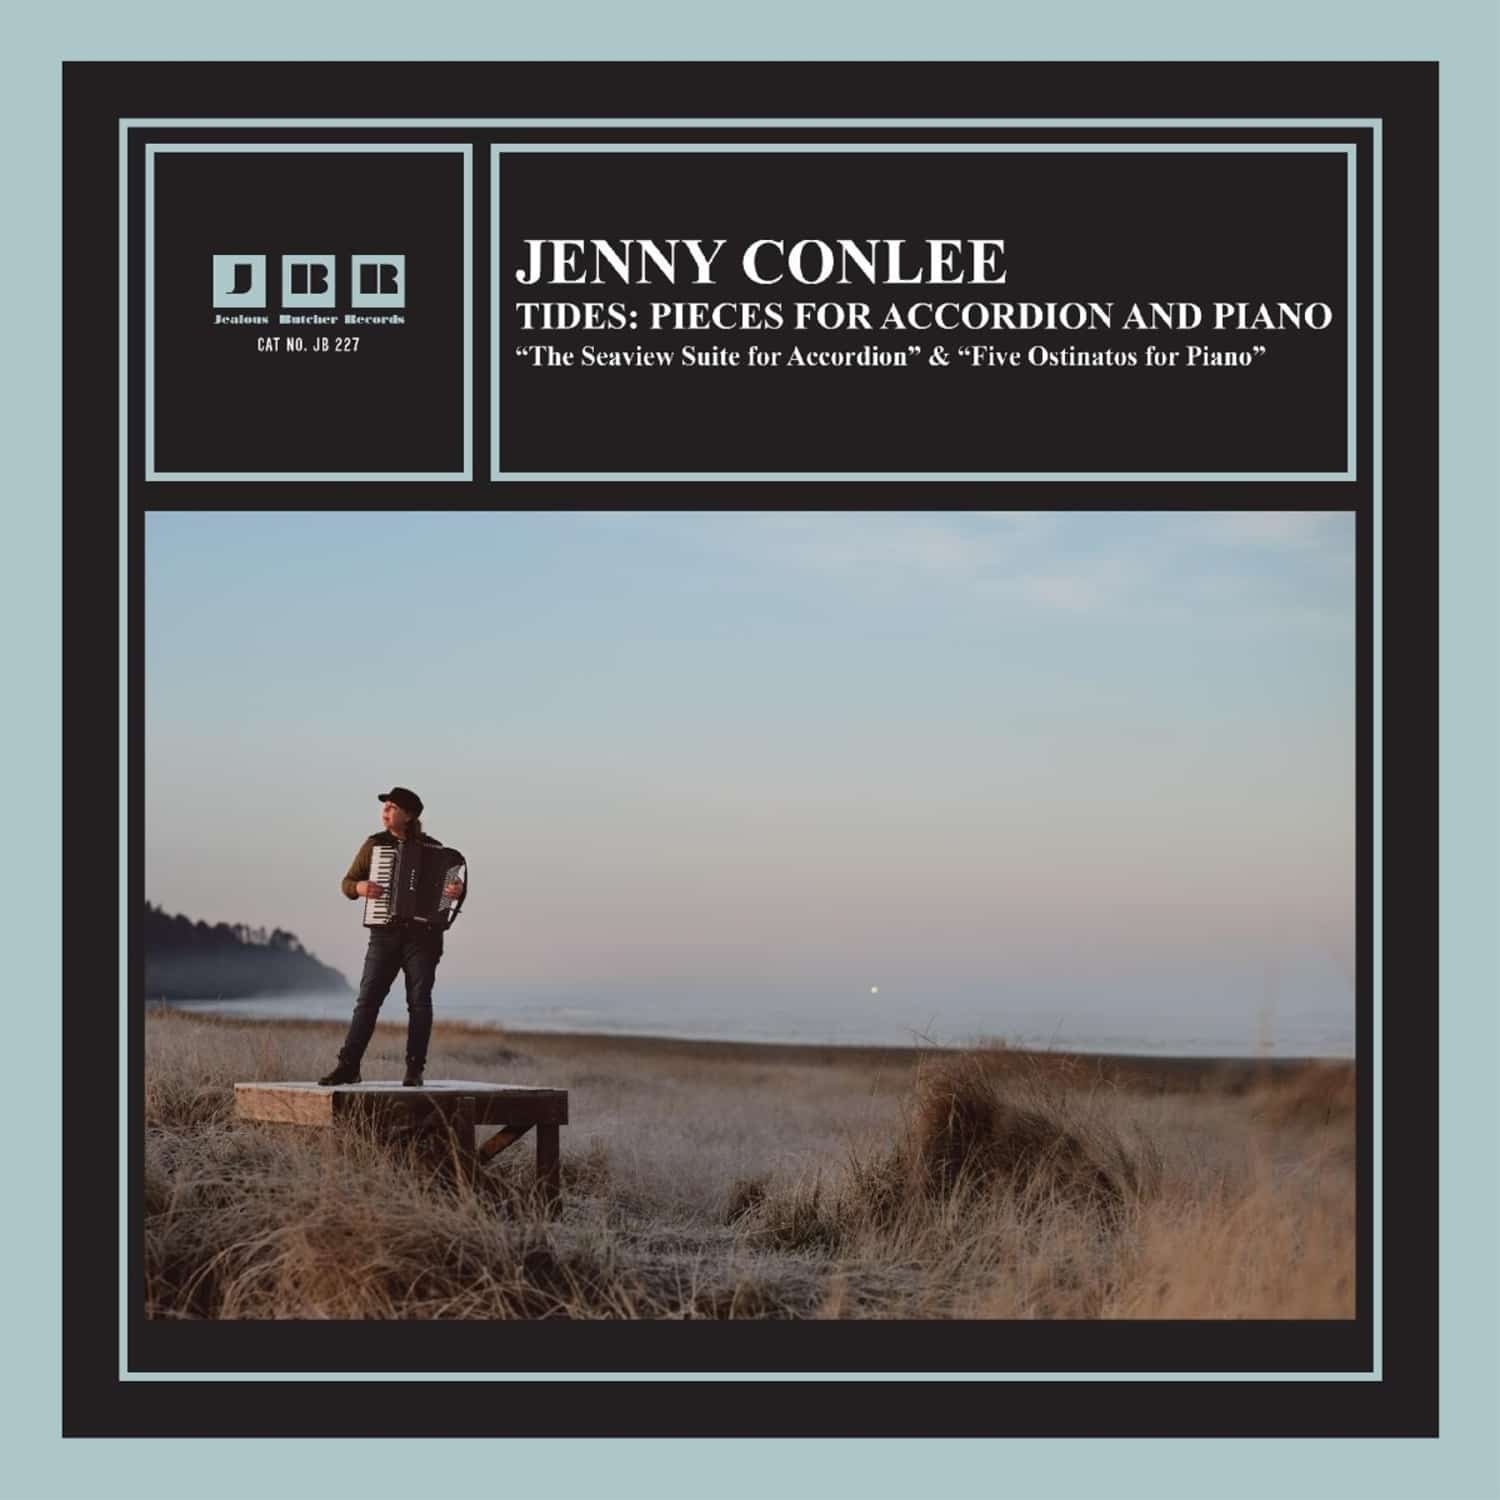  Jenny Conlee - TIDES: PIECES FOR ACCORDION AND PIANO 